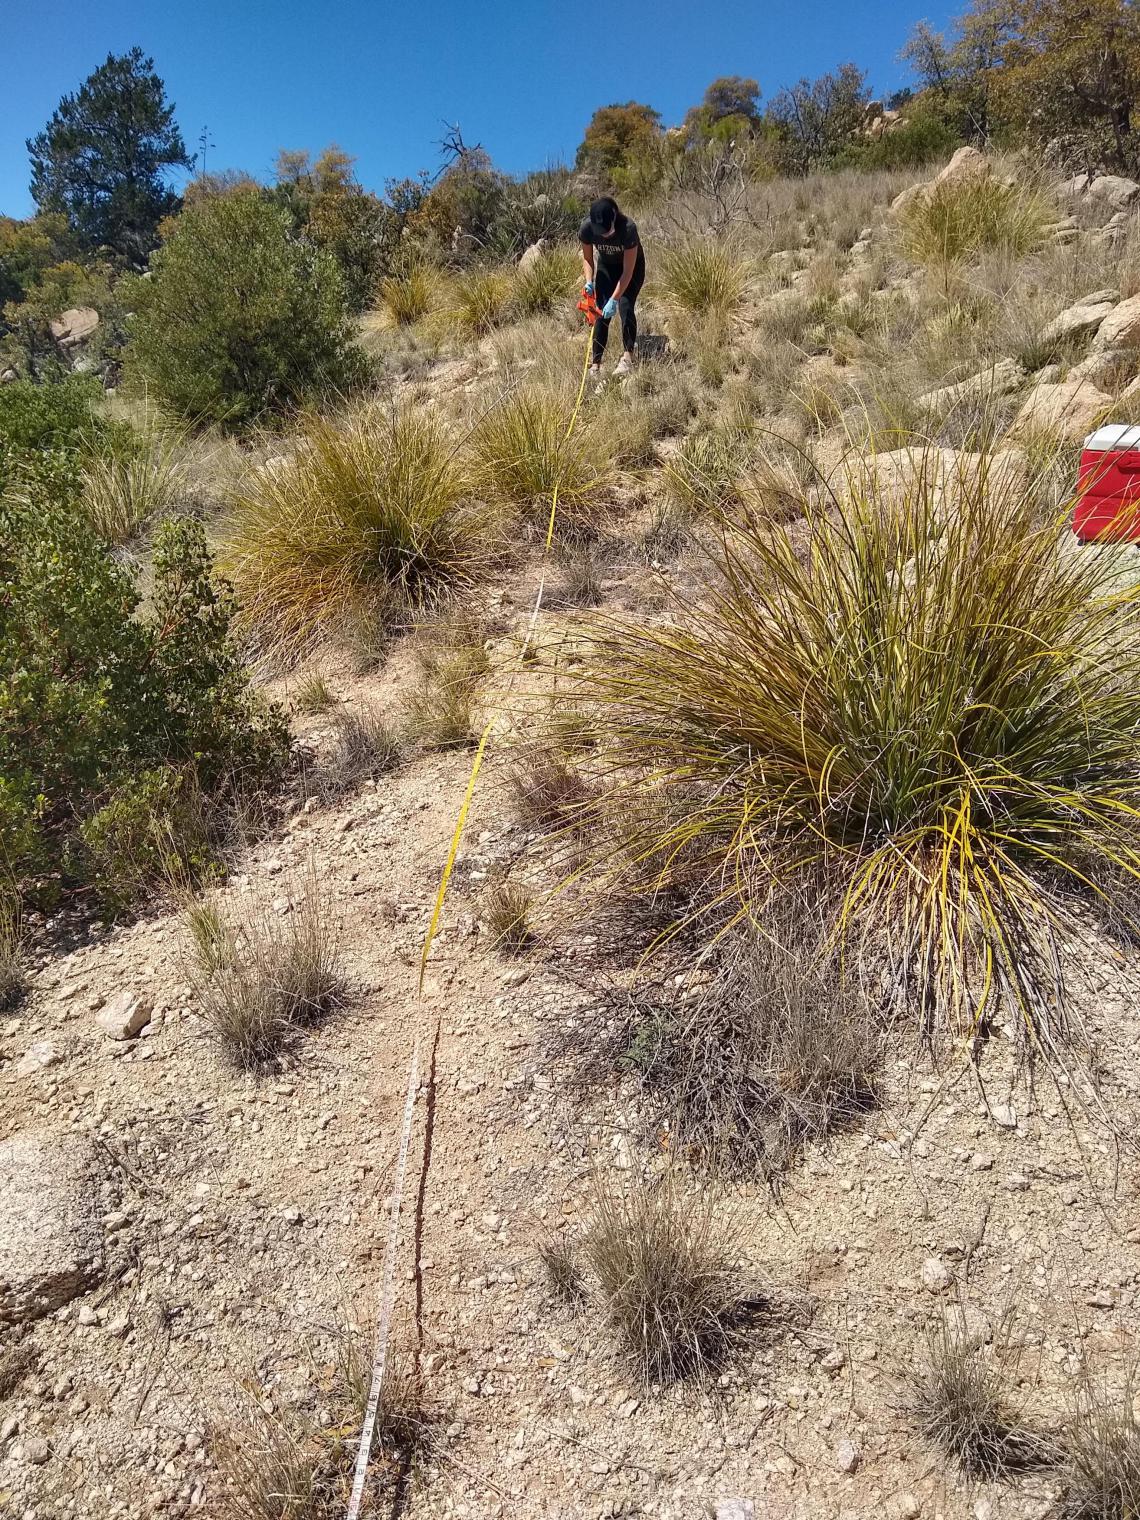 Studying microbial communities in the desert